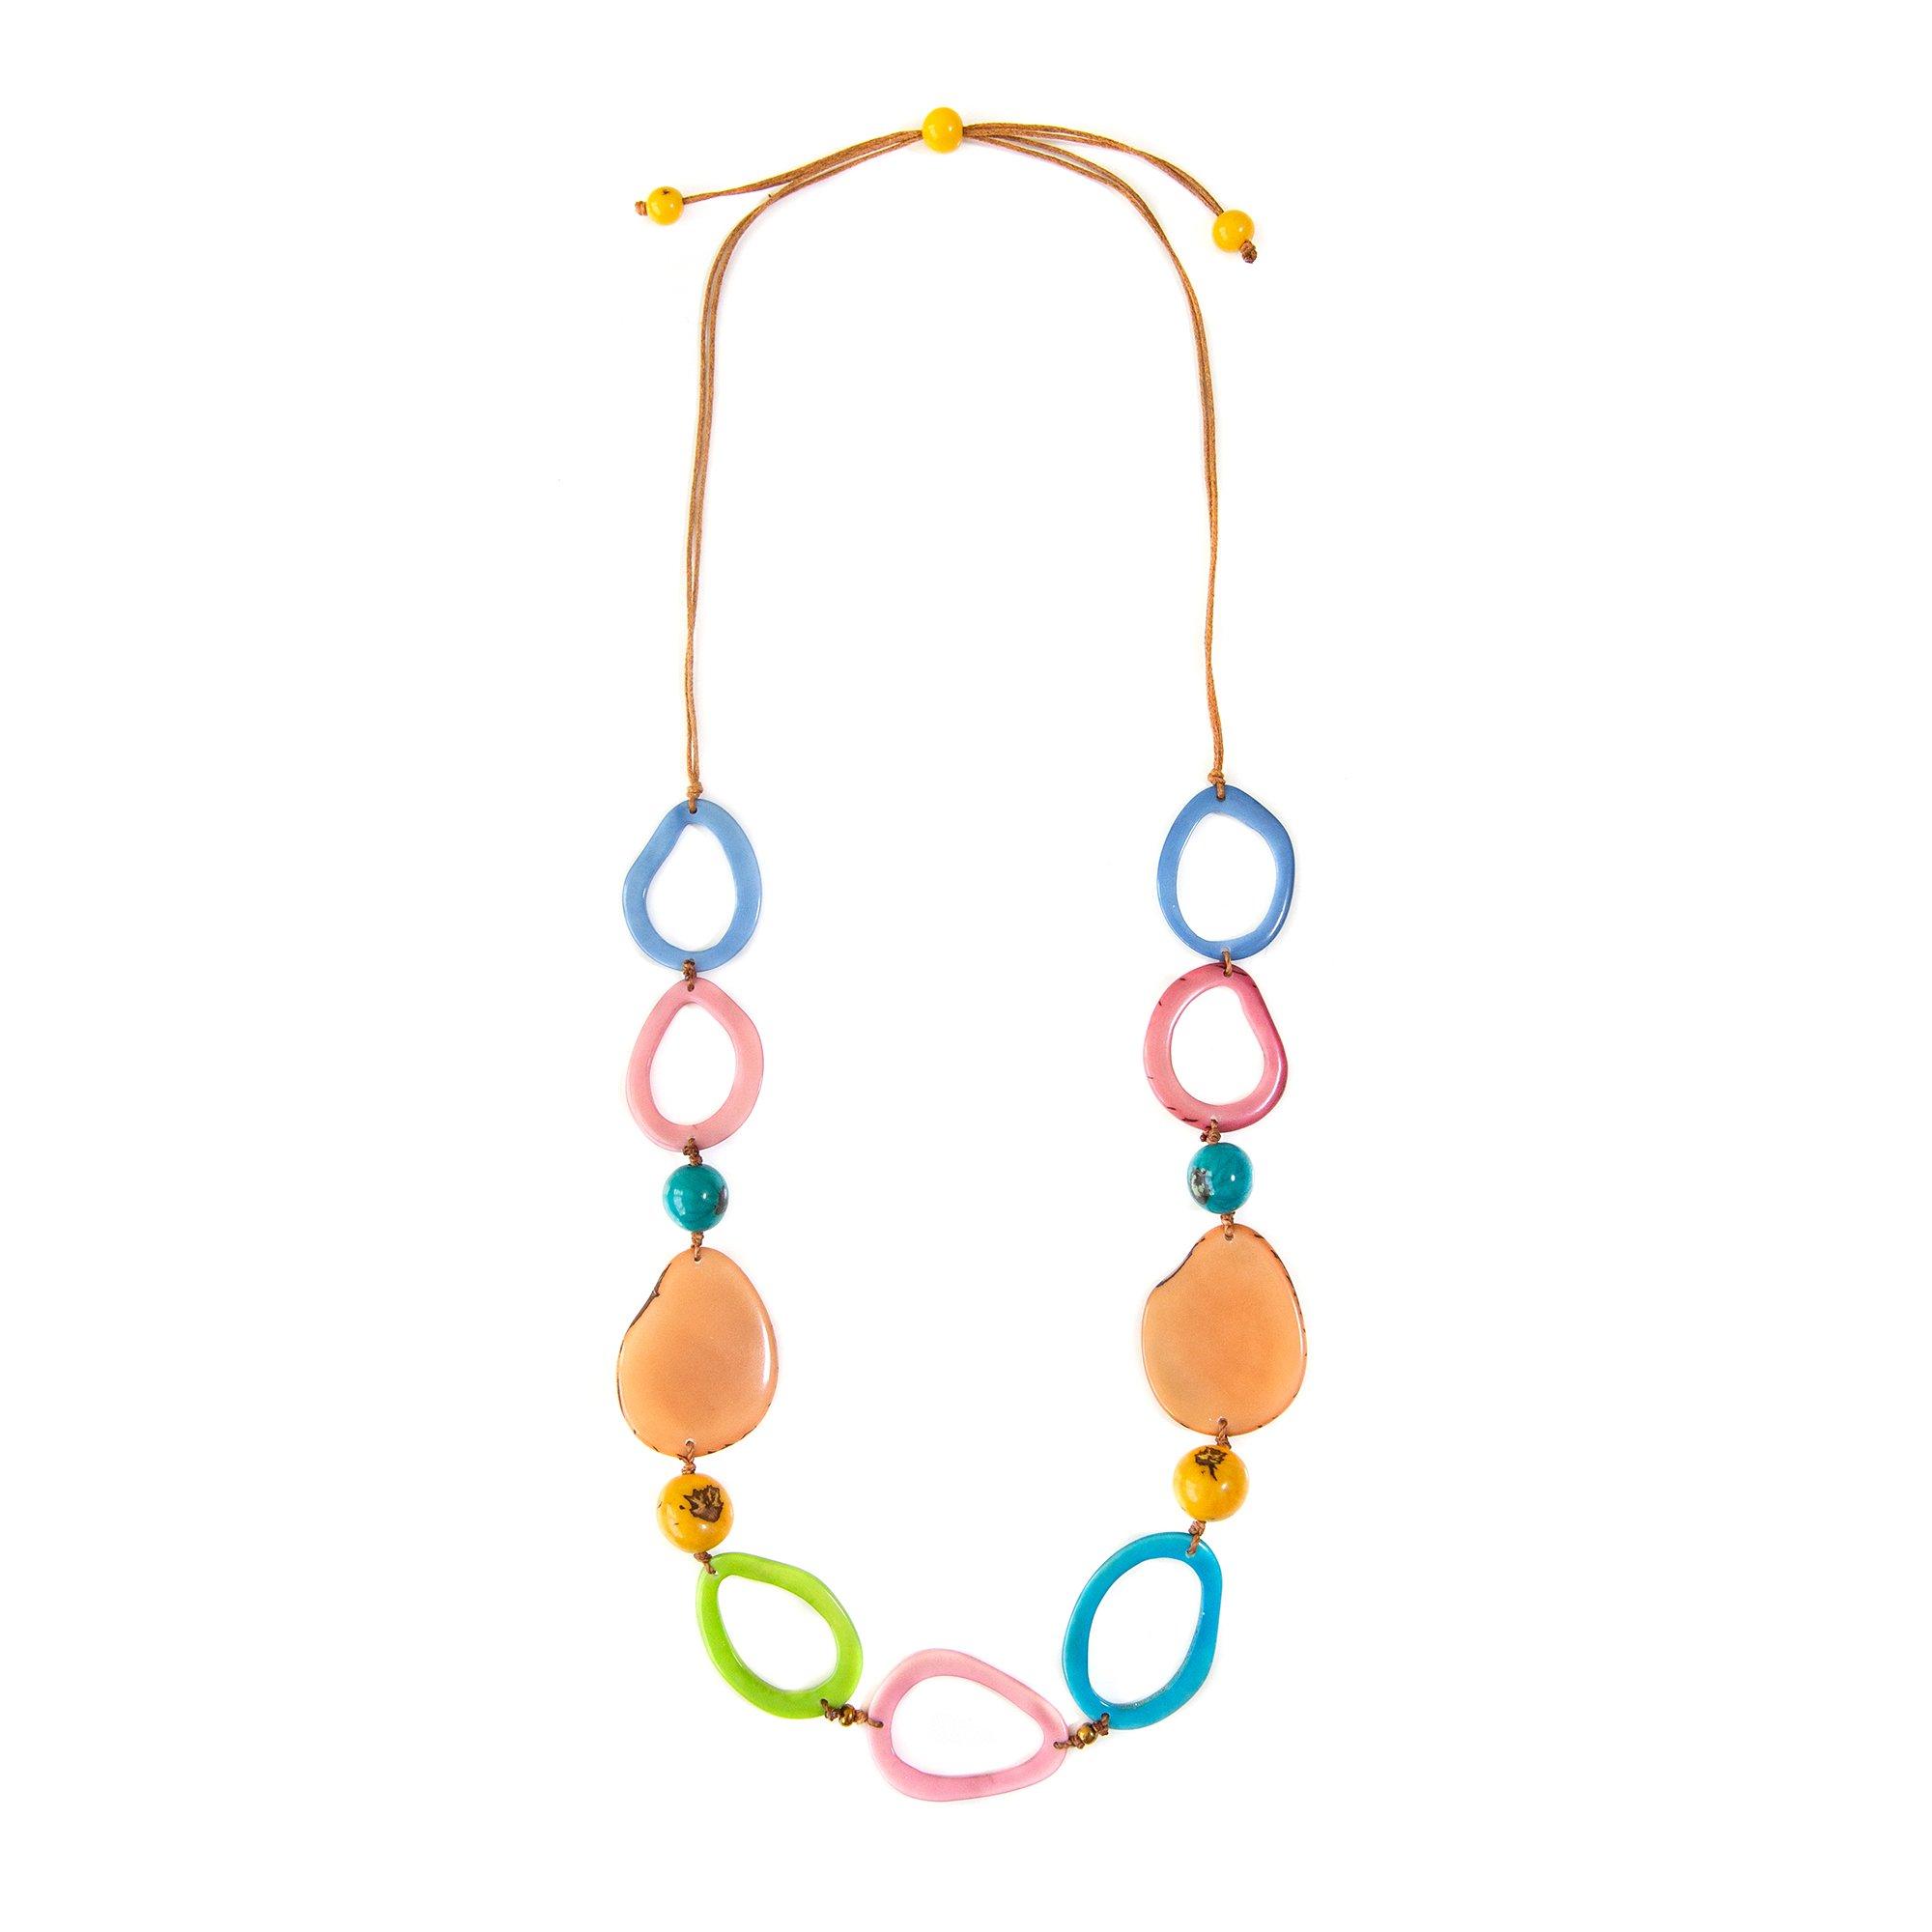 20 In. Multi-Colored Links Adjustable Necklace